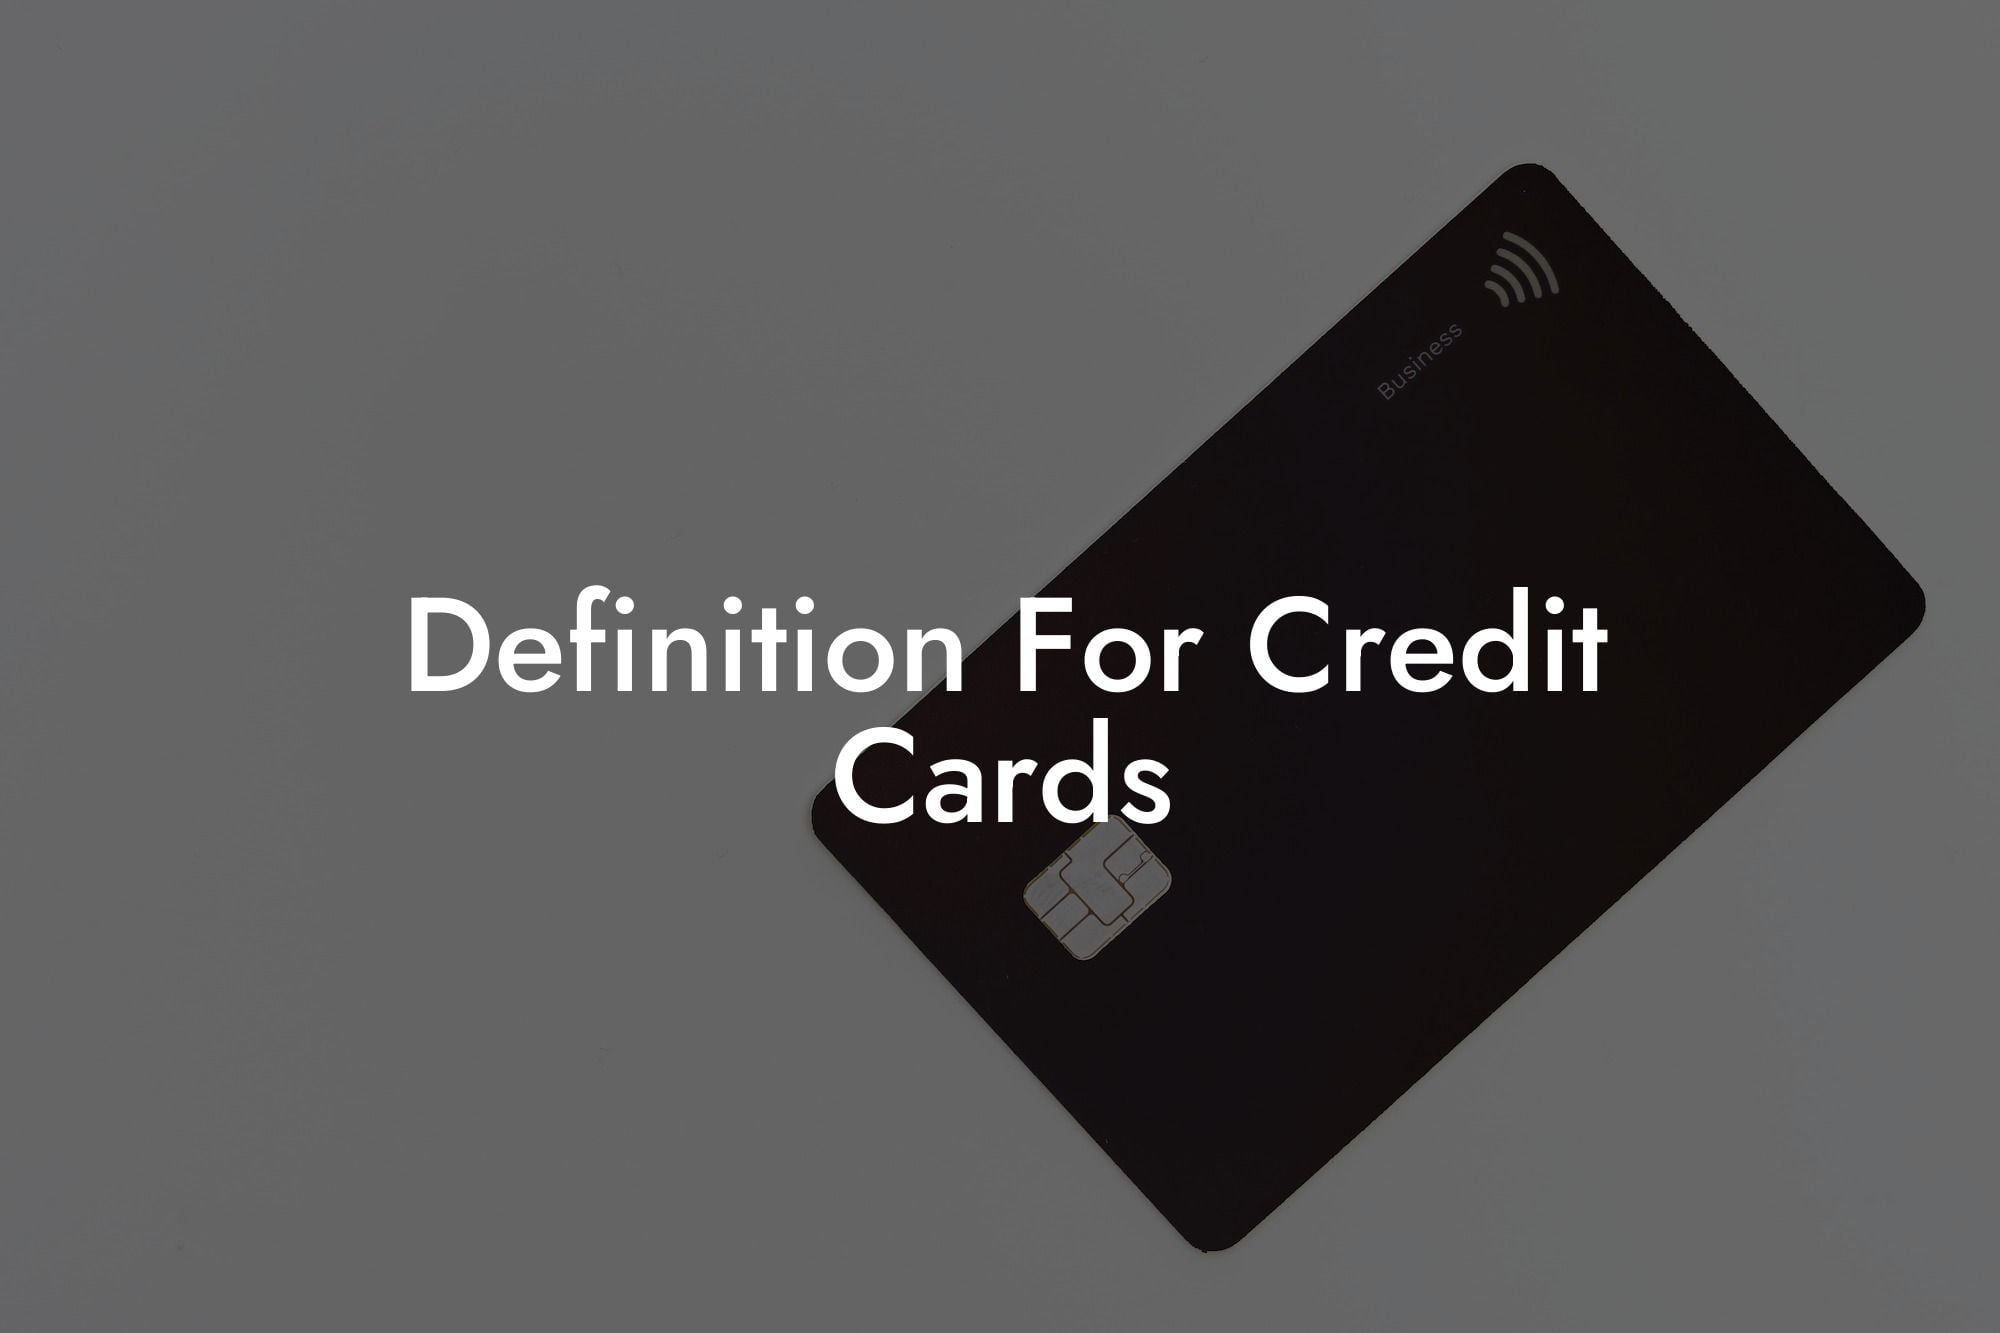 Definition For Credit Cards